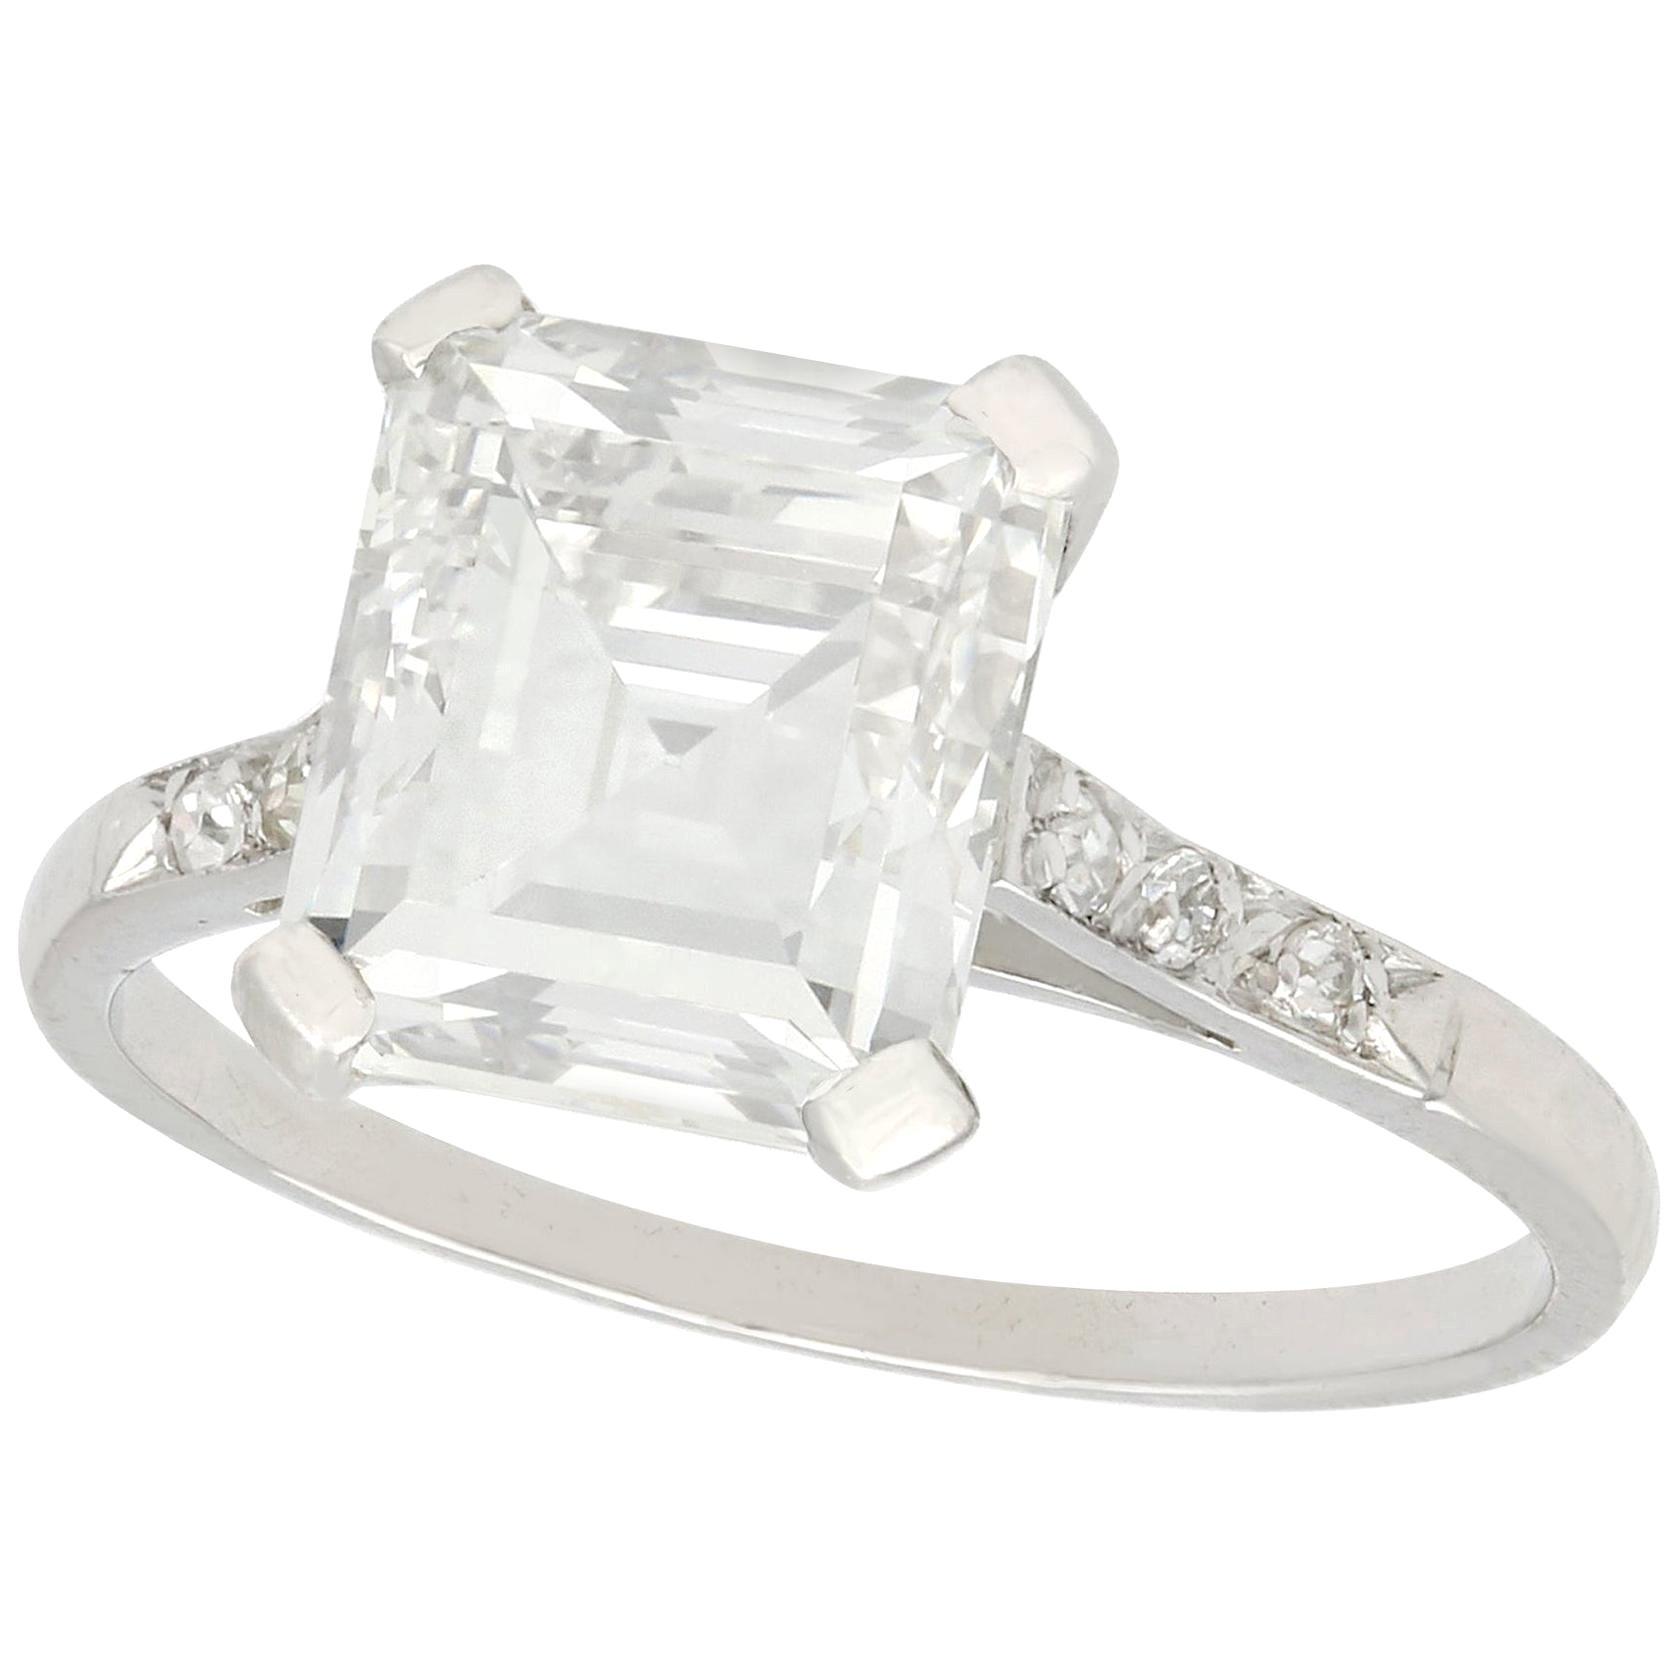 GIA Certified 1930s 2.84 Carat Diamond and Platinum Solitaire Ring